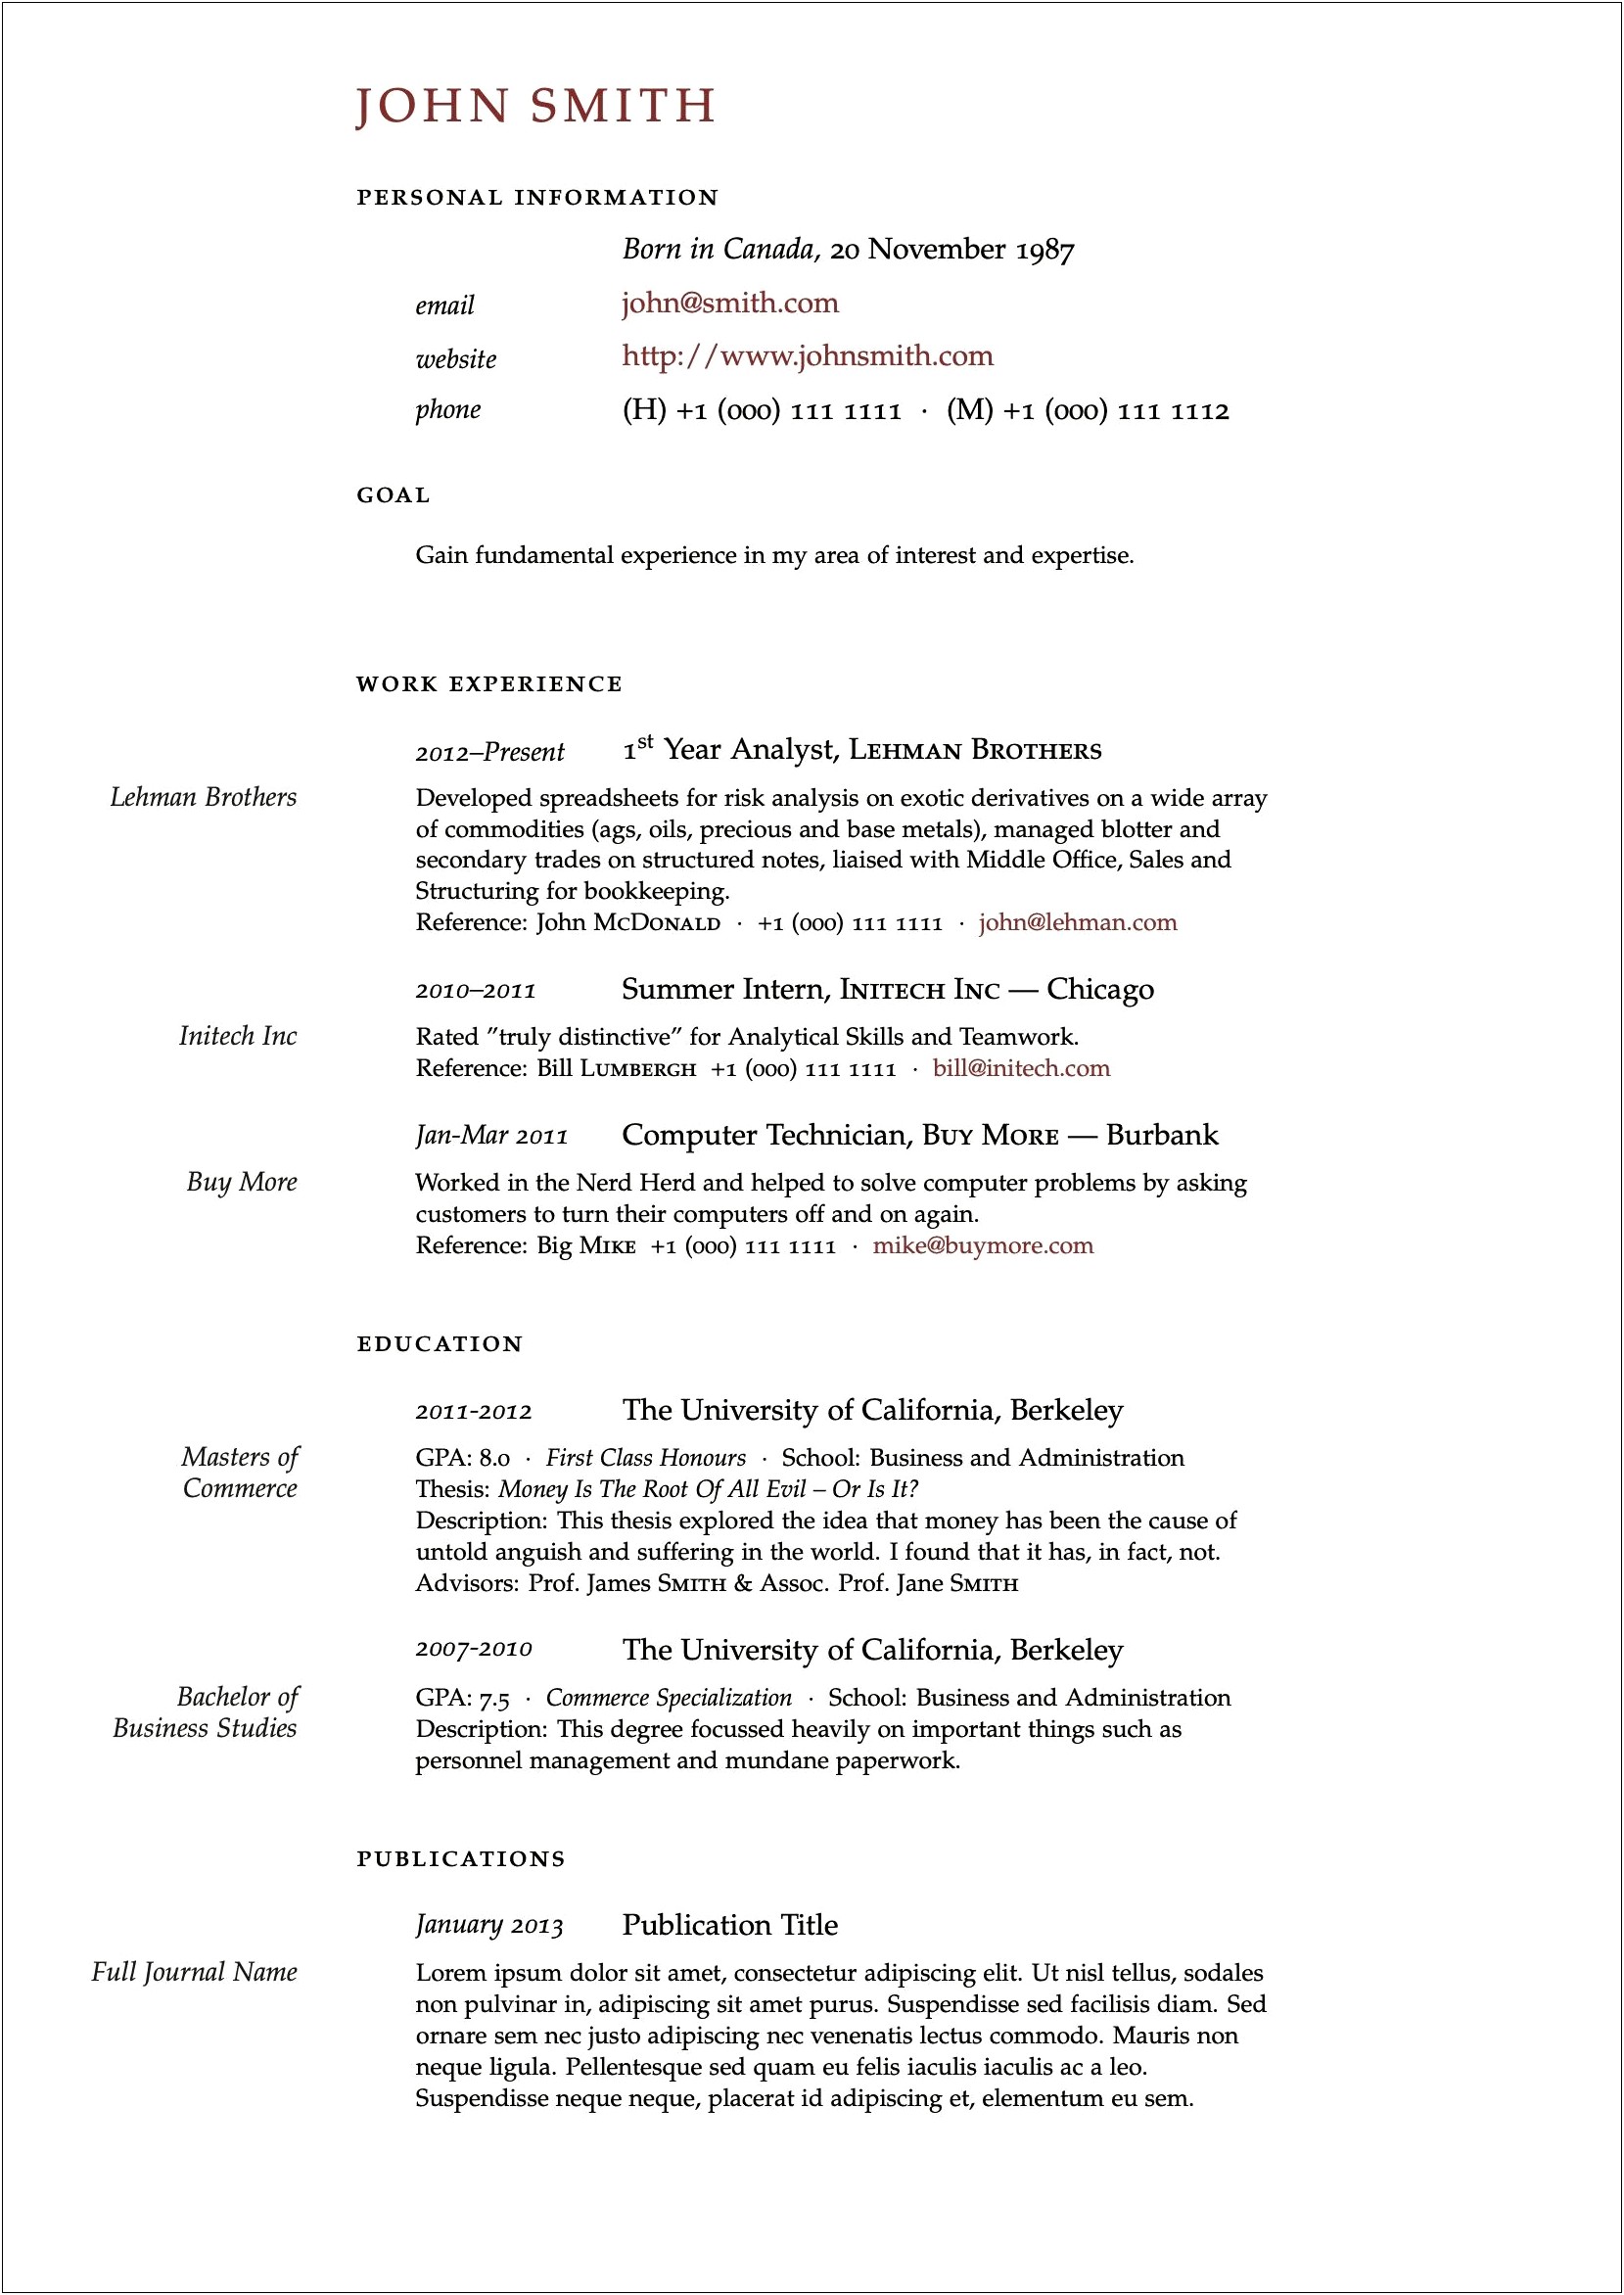 Resume Sections For High School Students